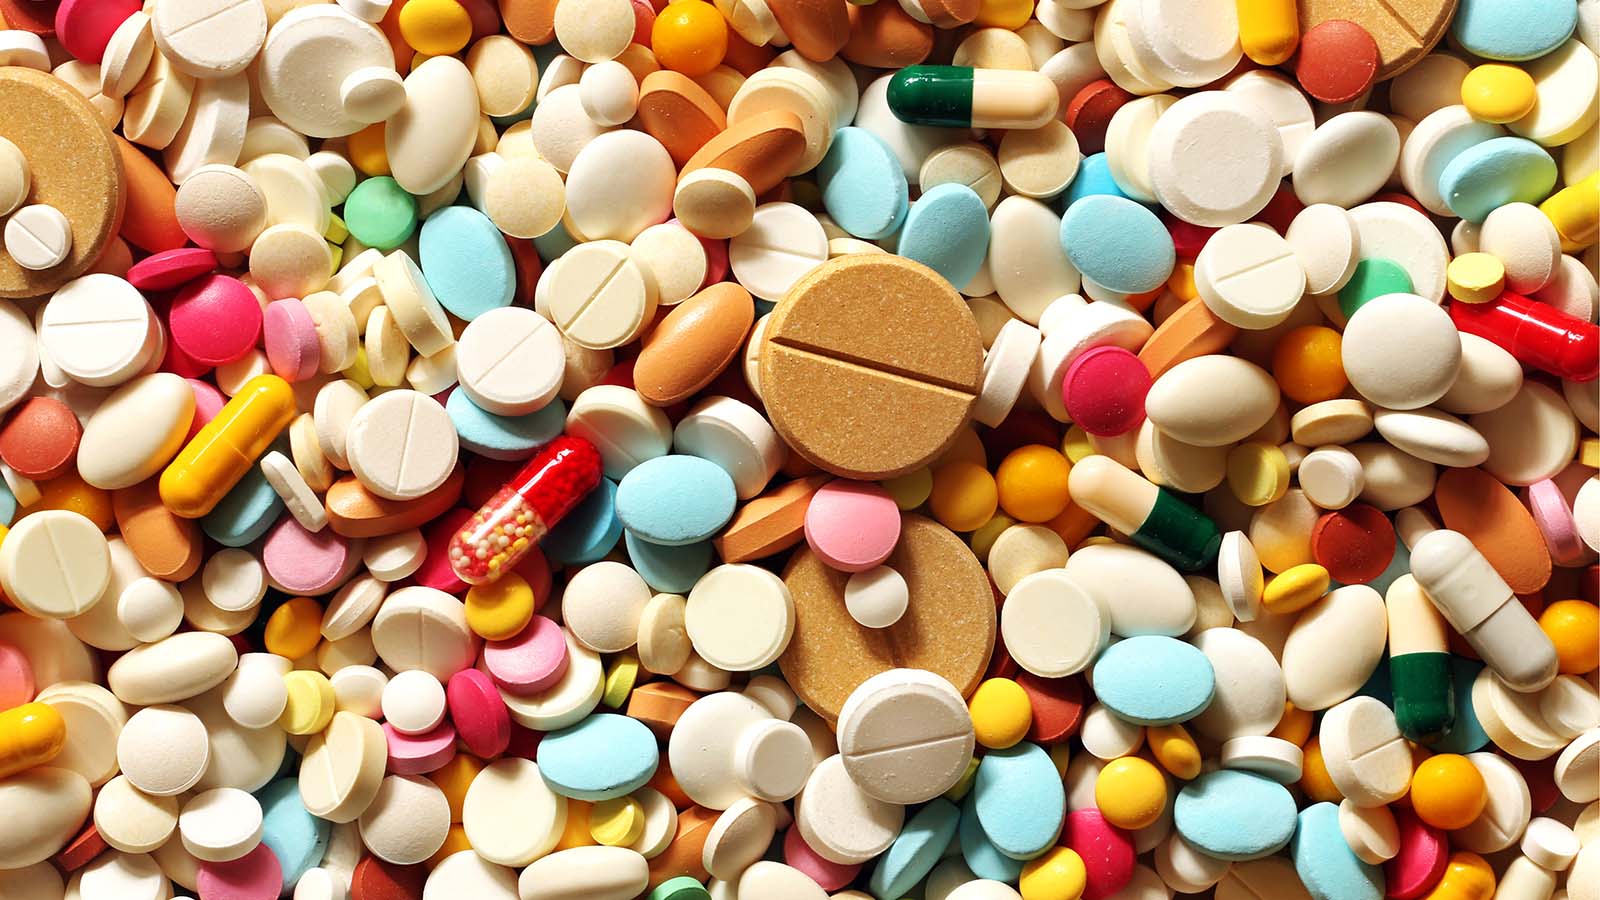 AMAM Stock. A pile of brightly colored pills in varying sizes and shapes representing CLNN stock.